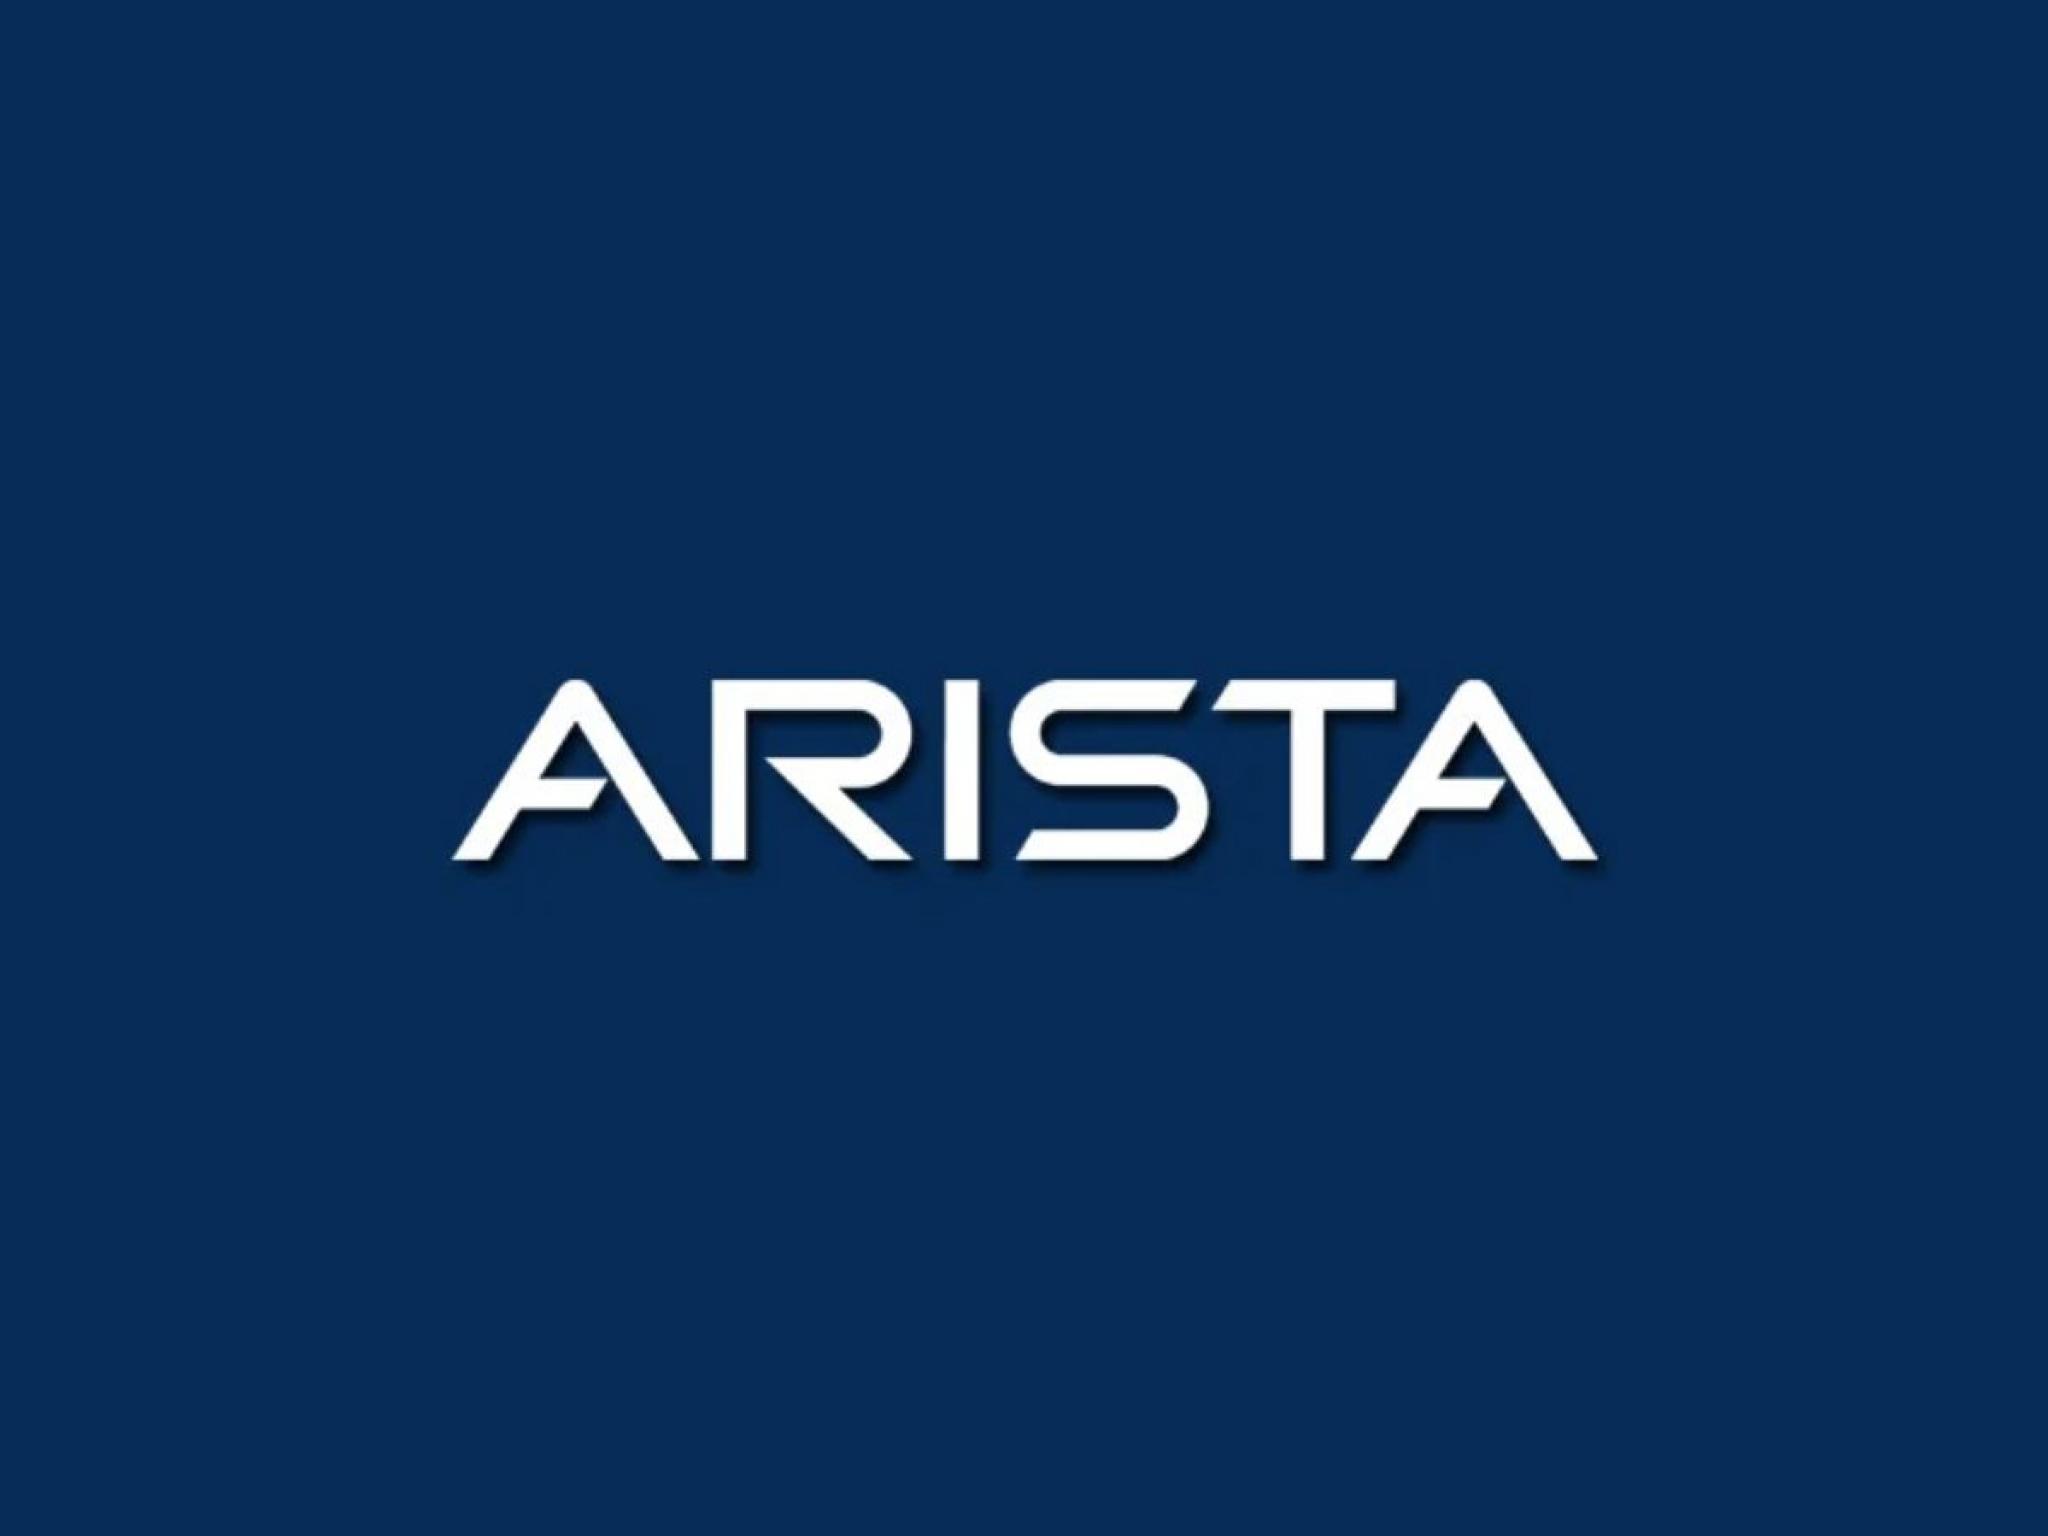  arista-networks-jinkosolar-repligen-shutterstock-and-other-big-stocks-moving-higher-on-tuesday 